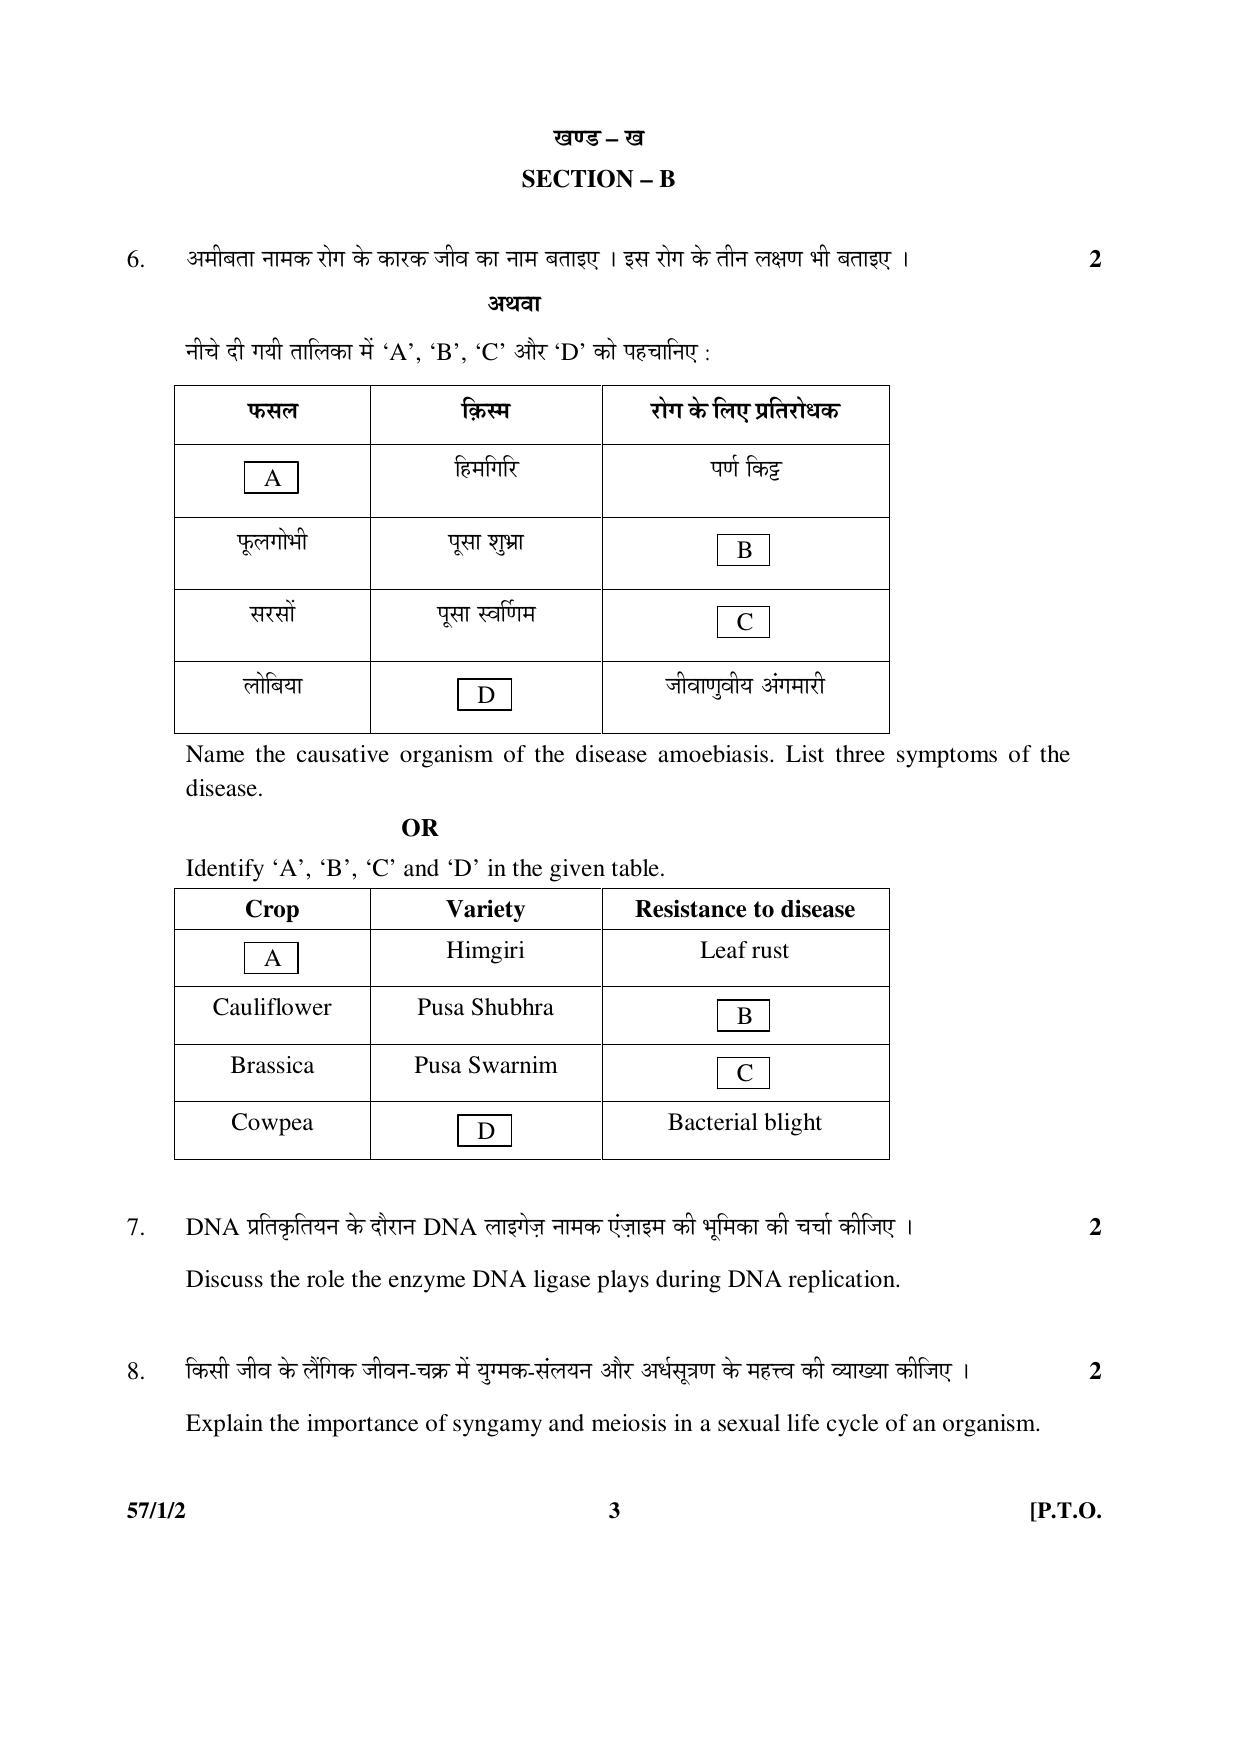 CBSE Class 12 57-1-2 BIOLOGY 2016 Question Paper - Page 3